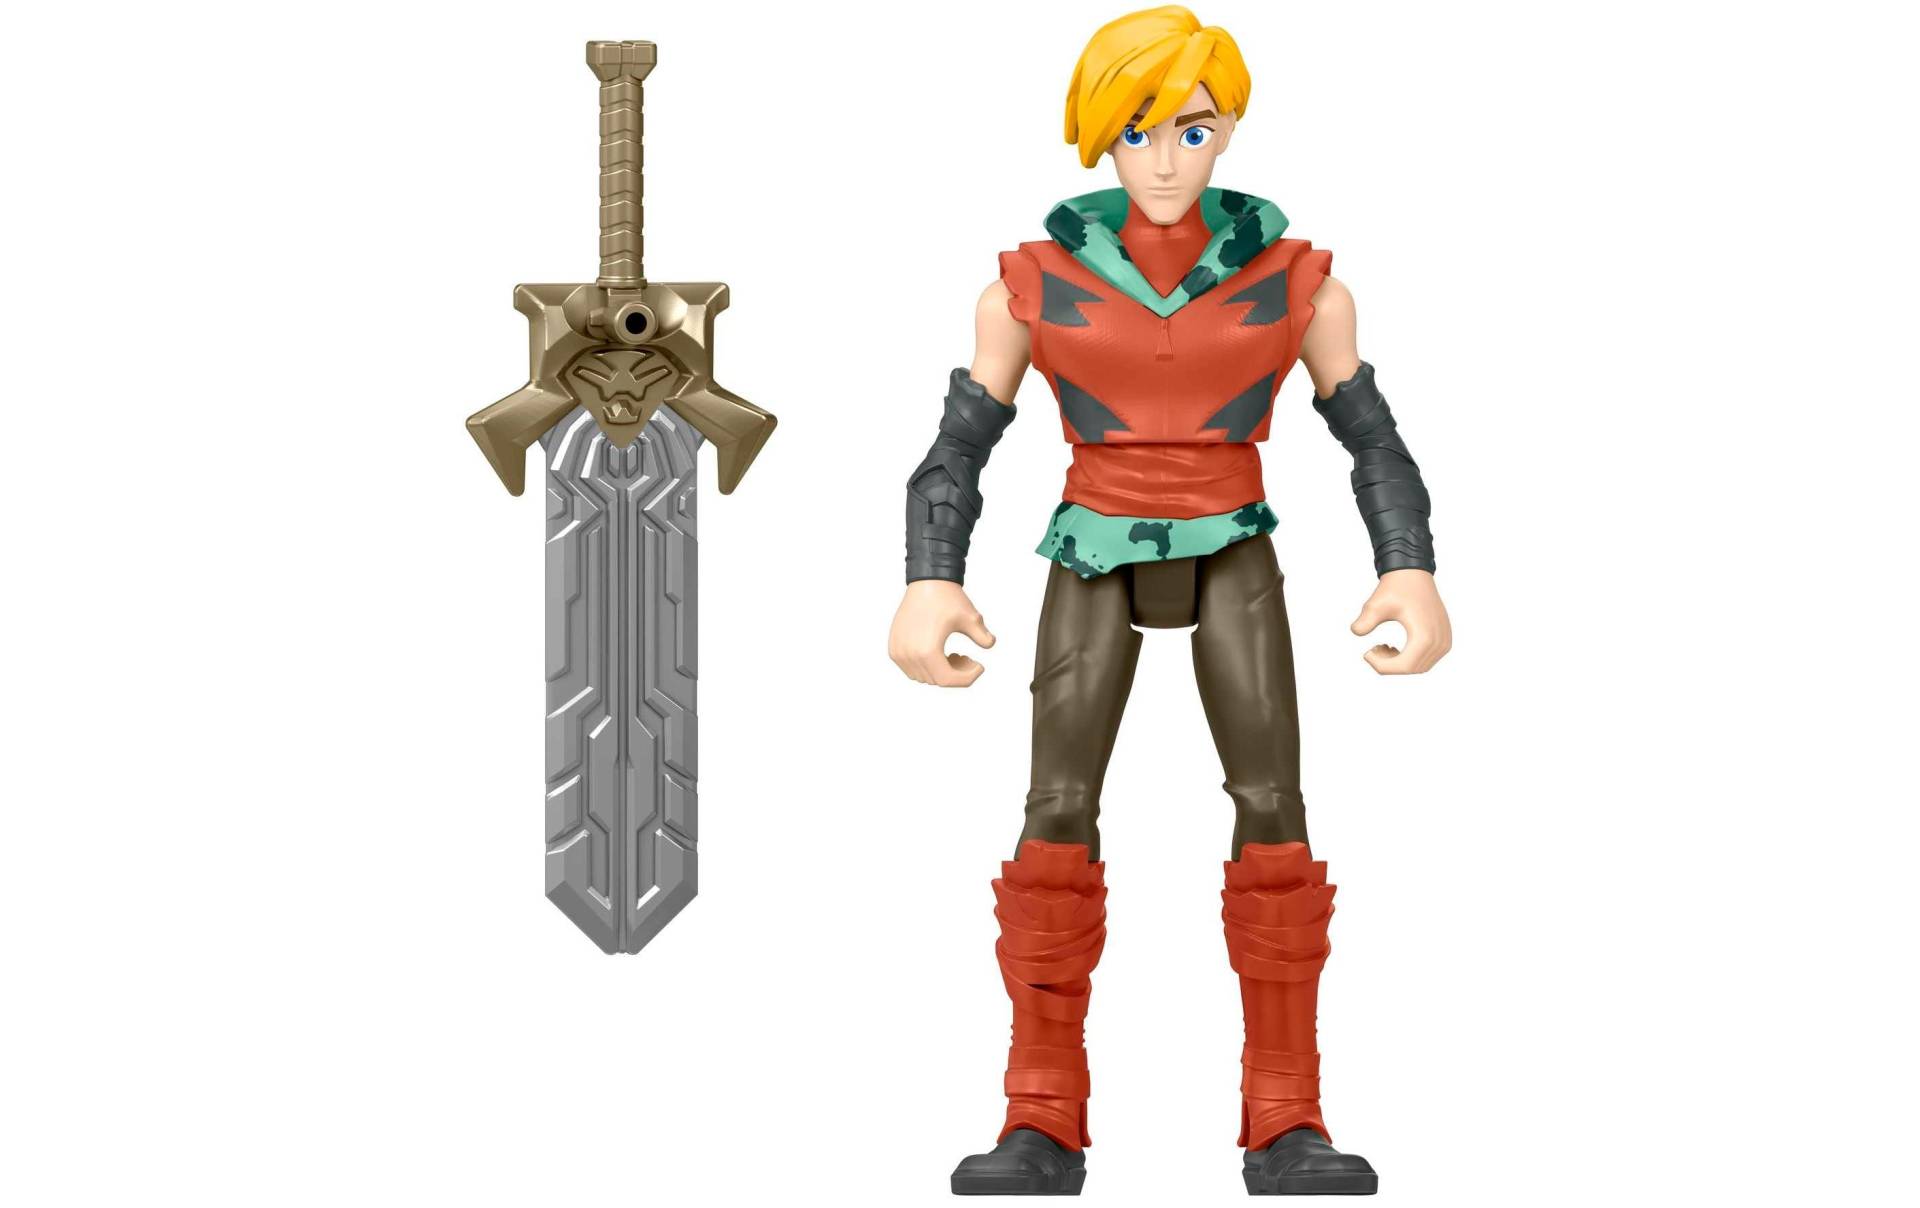 Mattel® Actionfigur »He-Man and the Masters of the Universe« von Mattel®